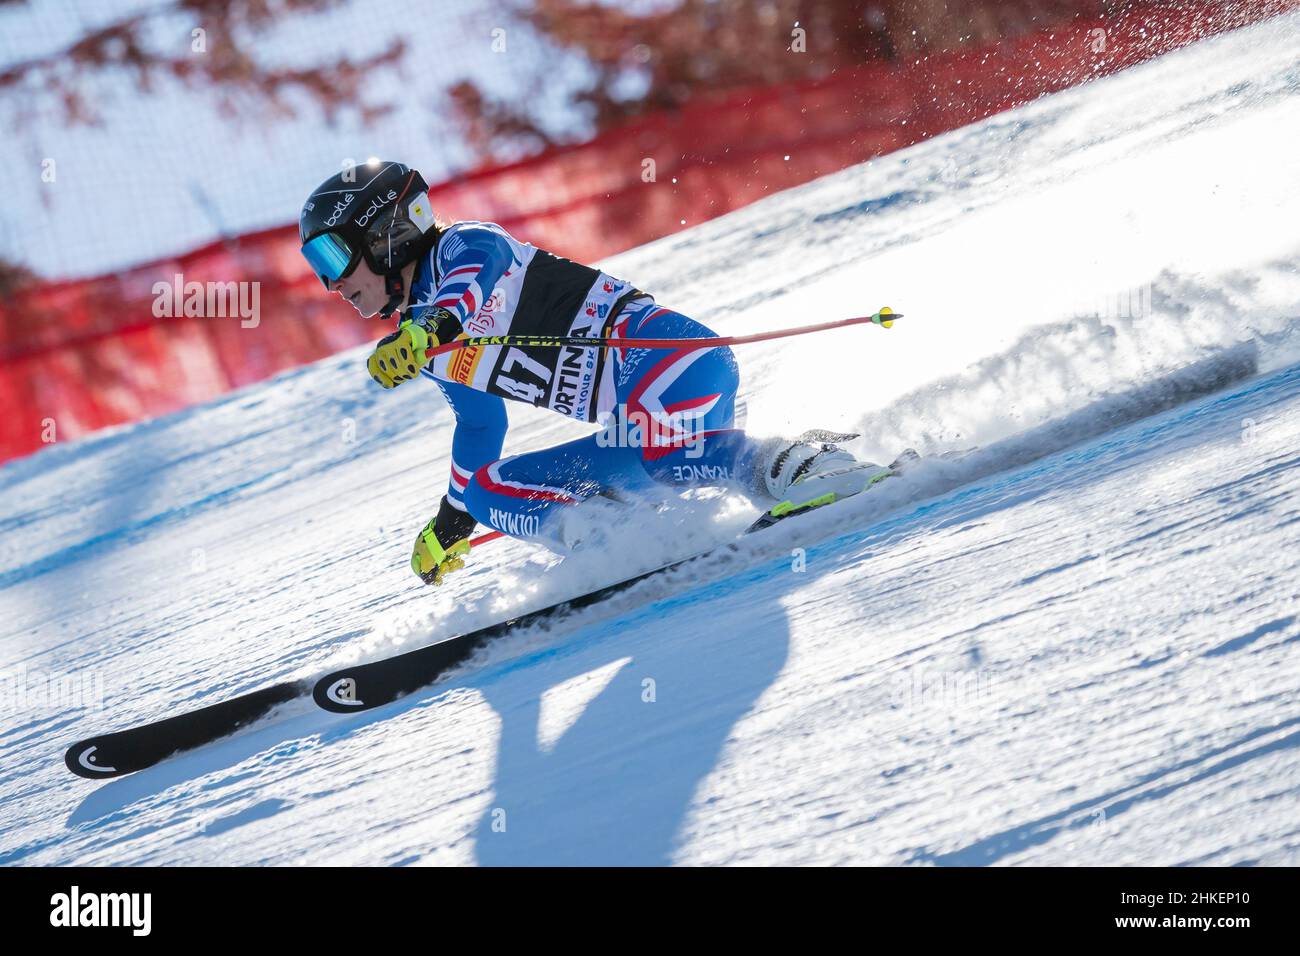 Cortina d'Ampezzo, Italy. 23 January 2022. PASLIER Esther (FRA) competing in the Fis Alpine Ski World Cup Women's Super-G on the Olympia delle Tofane. Stock Photo